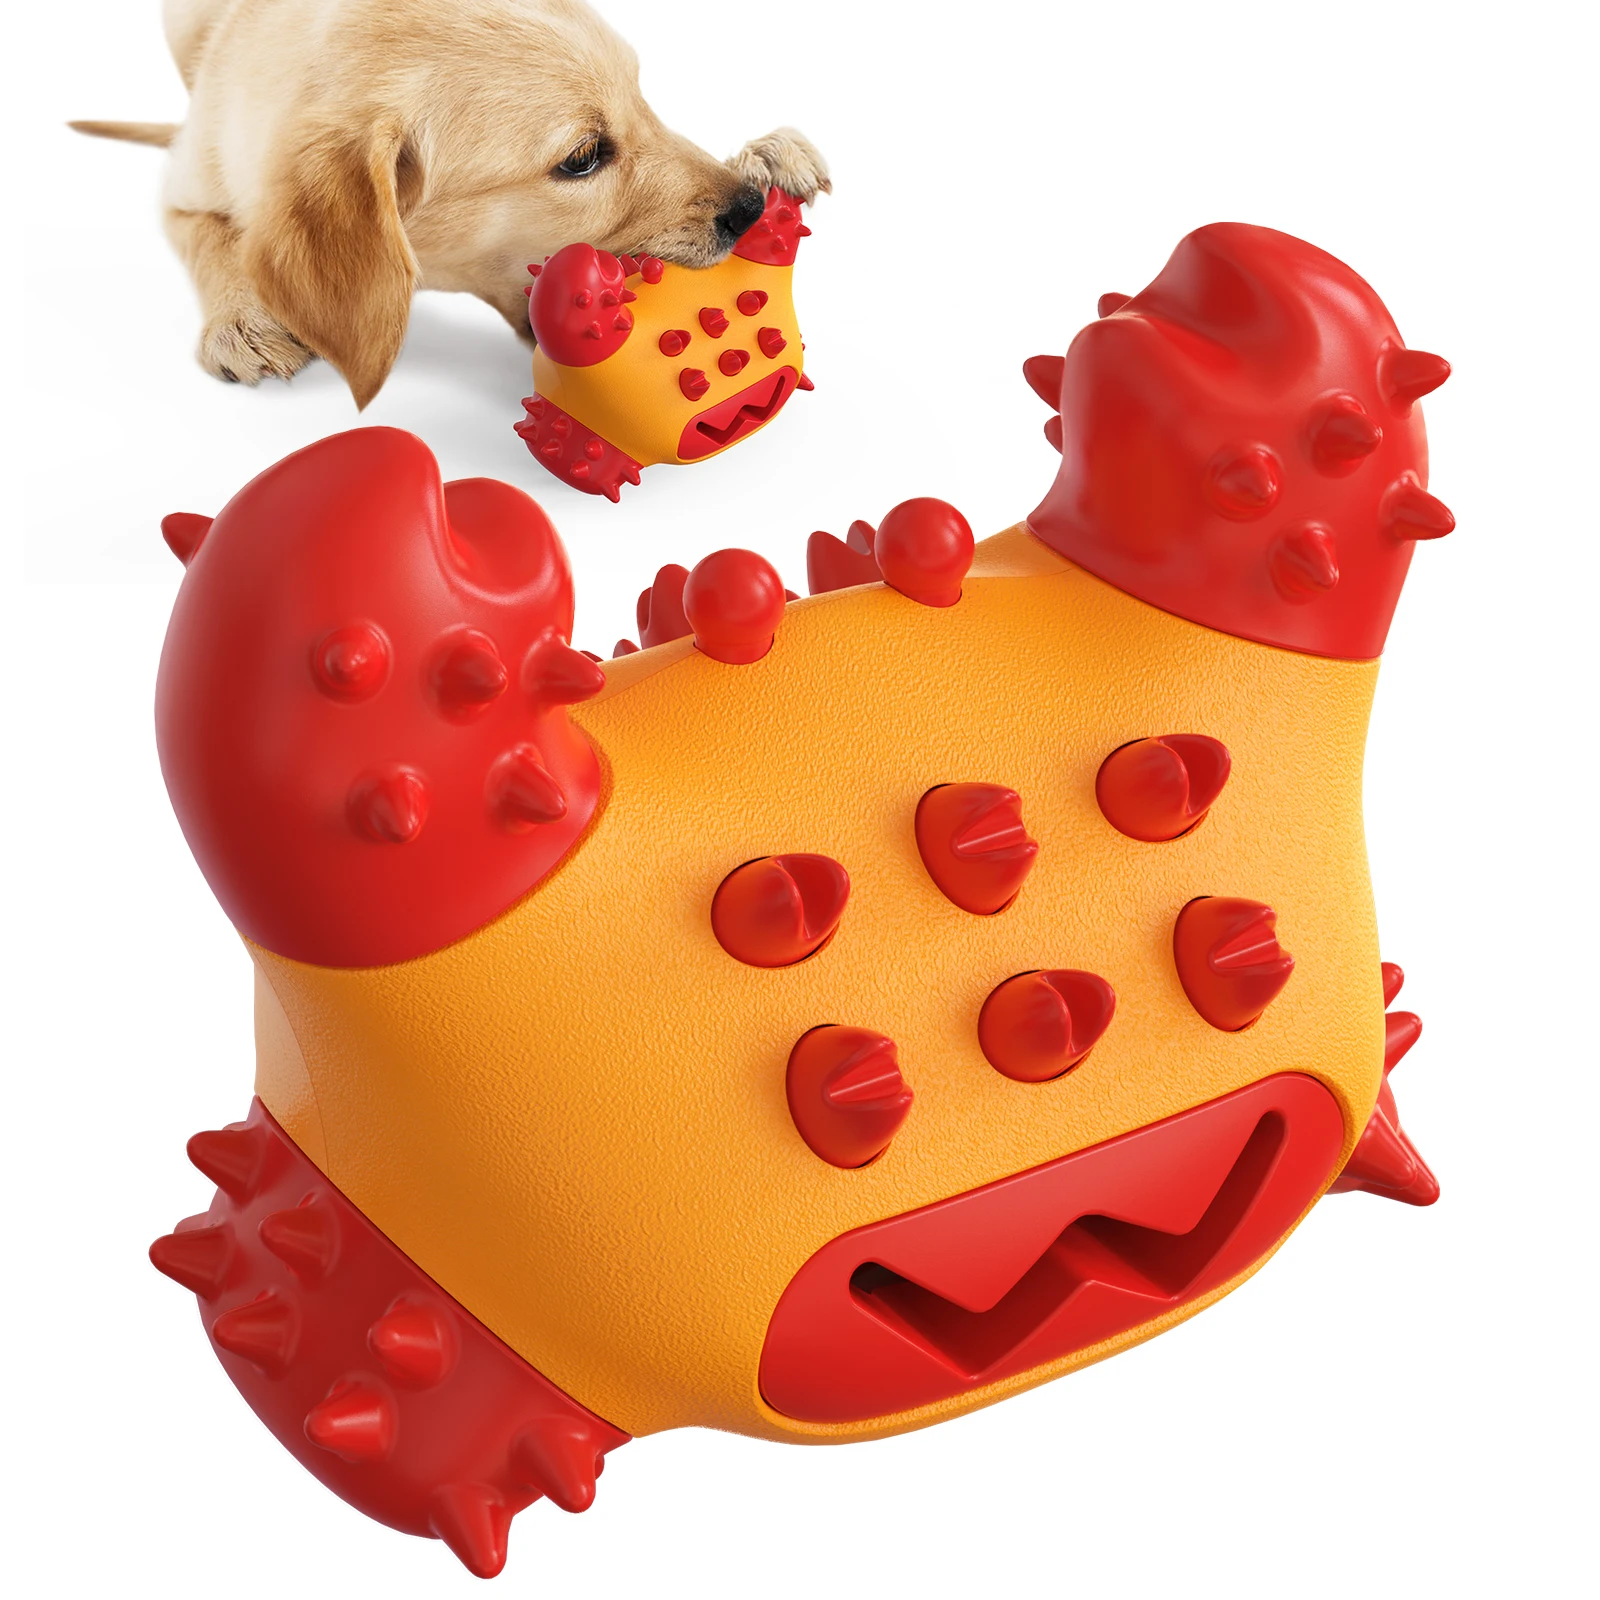 

Midepet Pet Supplies Dog Molar Teeth Resistant Chew Biting Toothbrush Outdoor Training Interactive Crab Leaking Food Dog Toys, Red, yellow